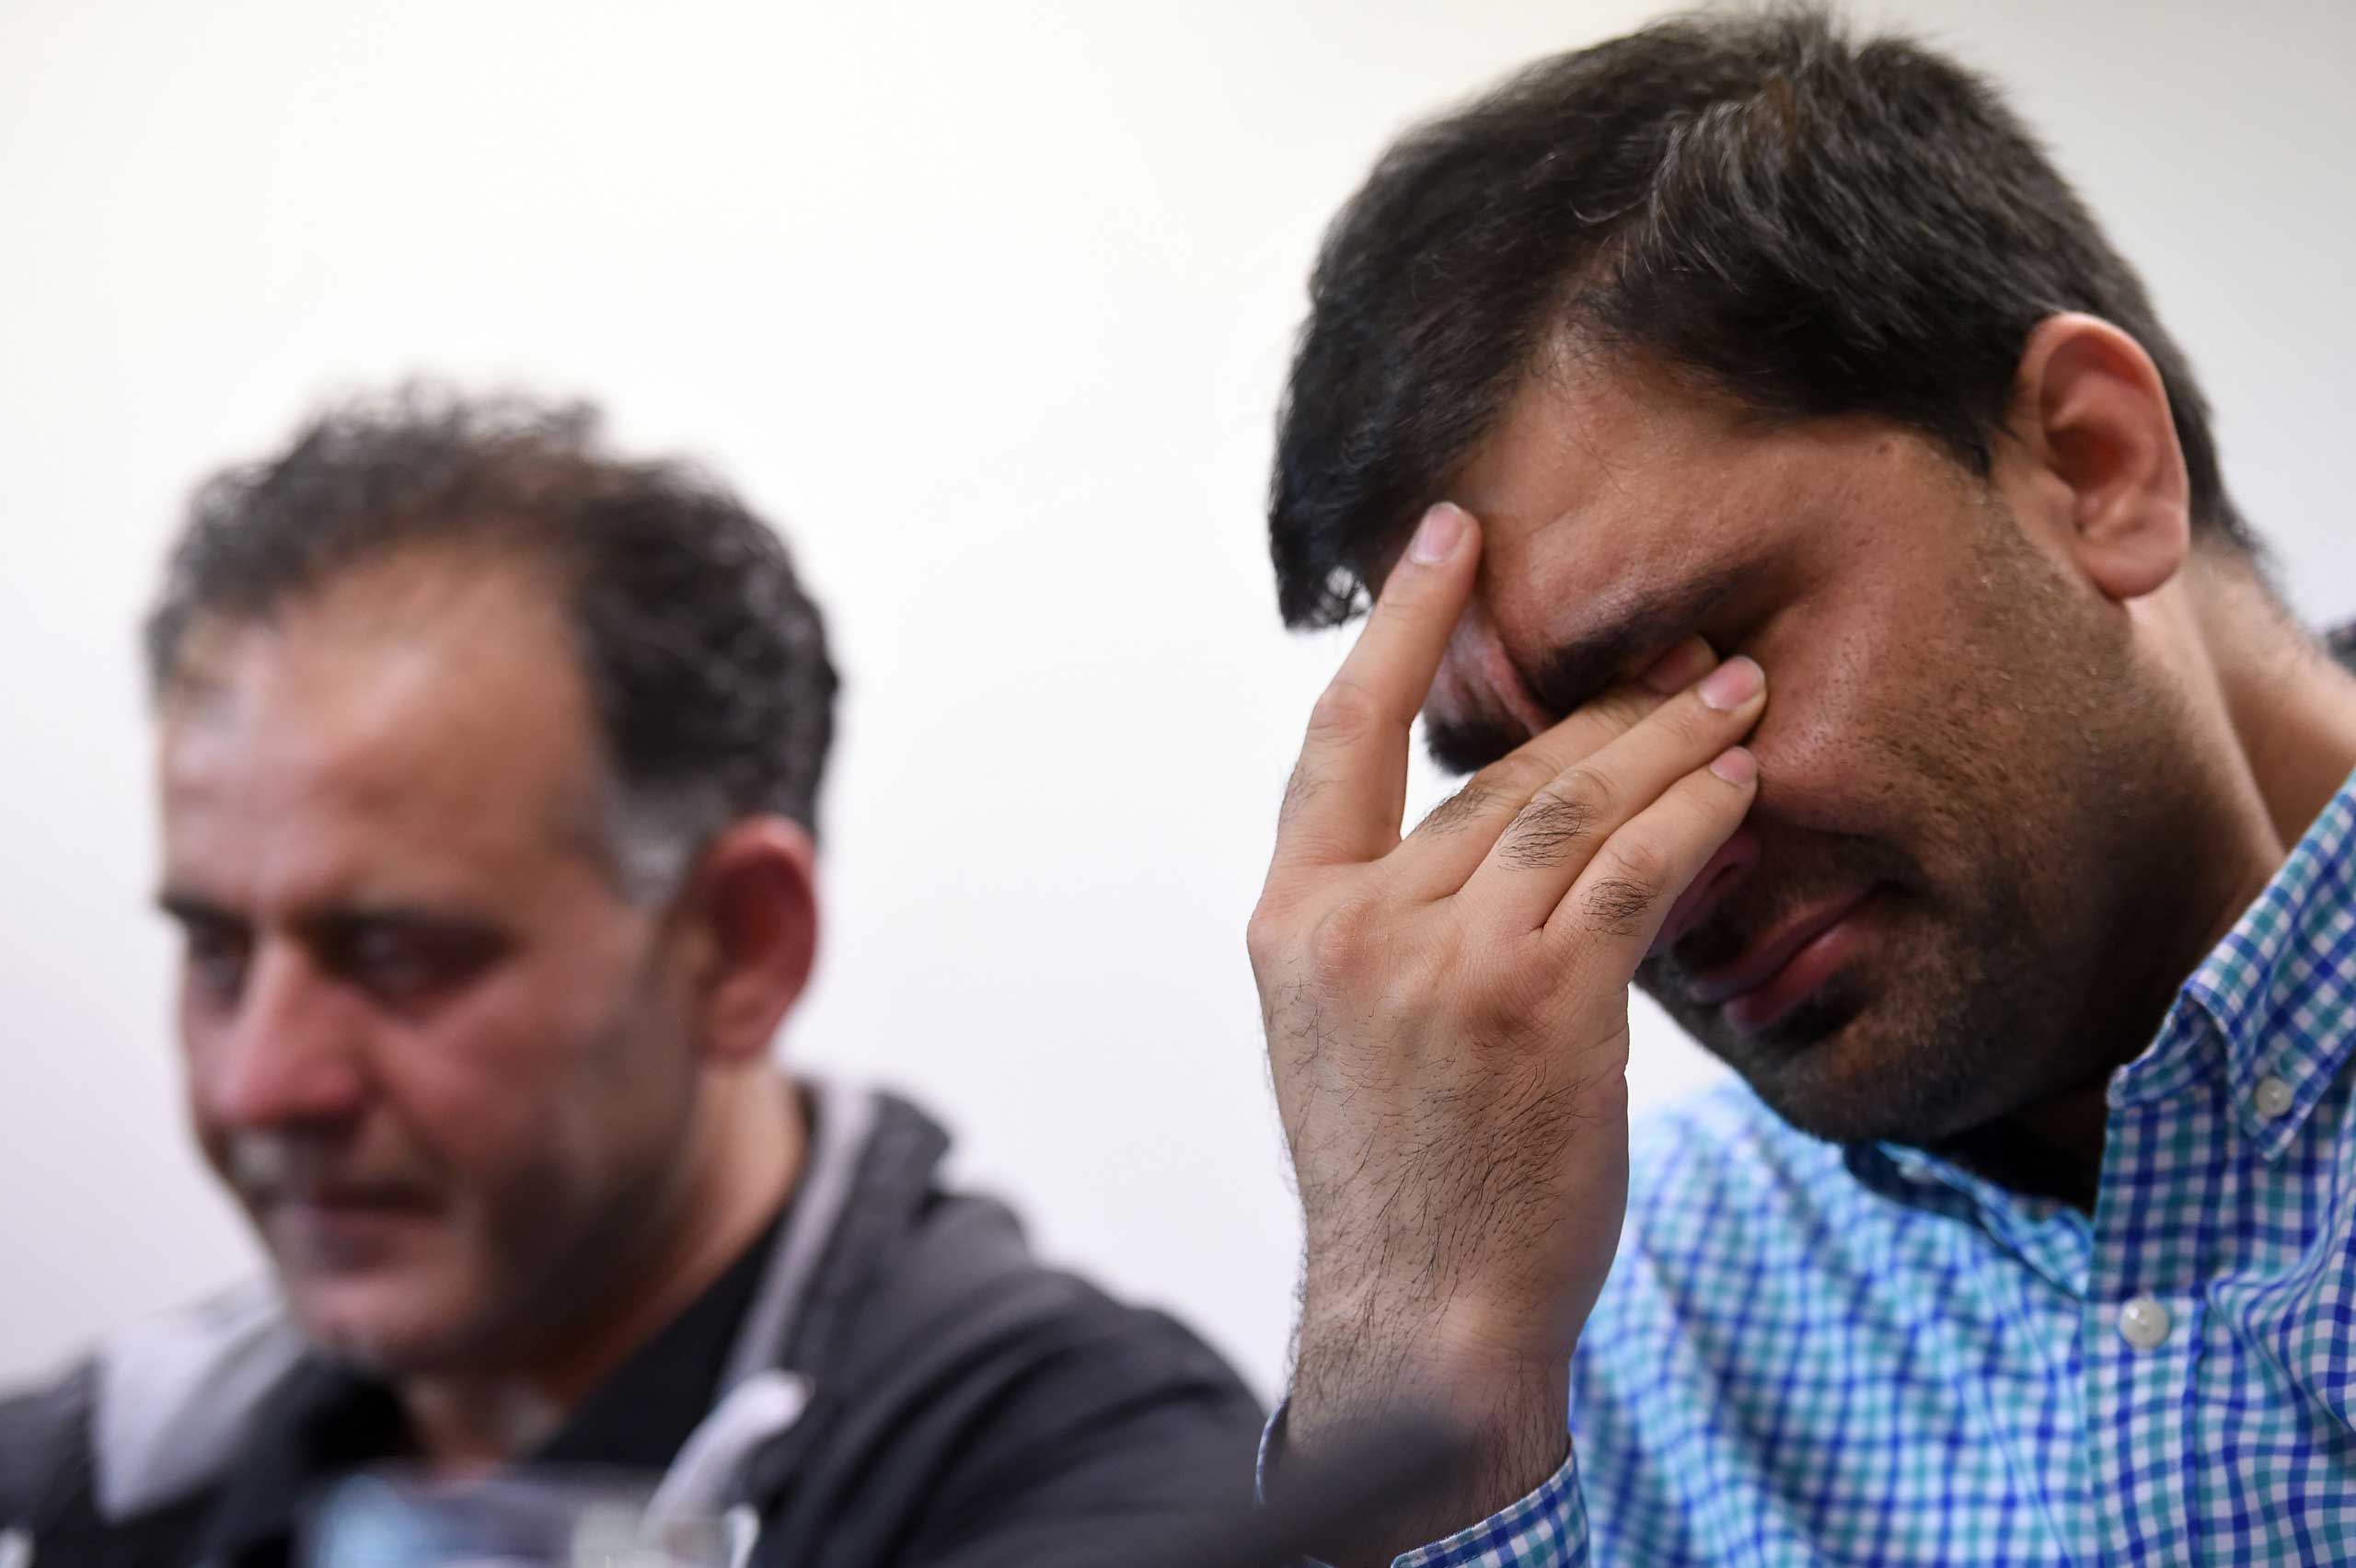 Akhtar Iqbal, husband of Sugra Dawood (L), and Mohammed Shoaib, husband of Khadija Dawood, react during a news conference to appeal for the return of their wives and children, in Bradford, northern England, on June 16, 2015. (Paul Ellis—AFP/Getty Images)